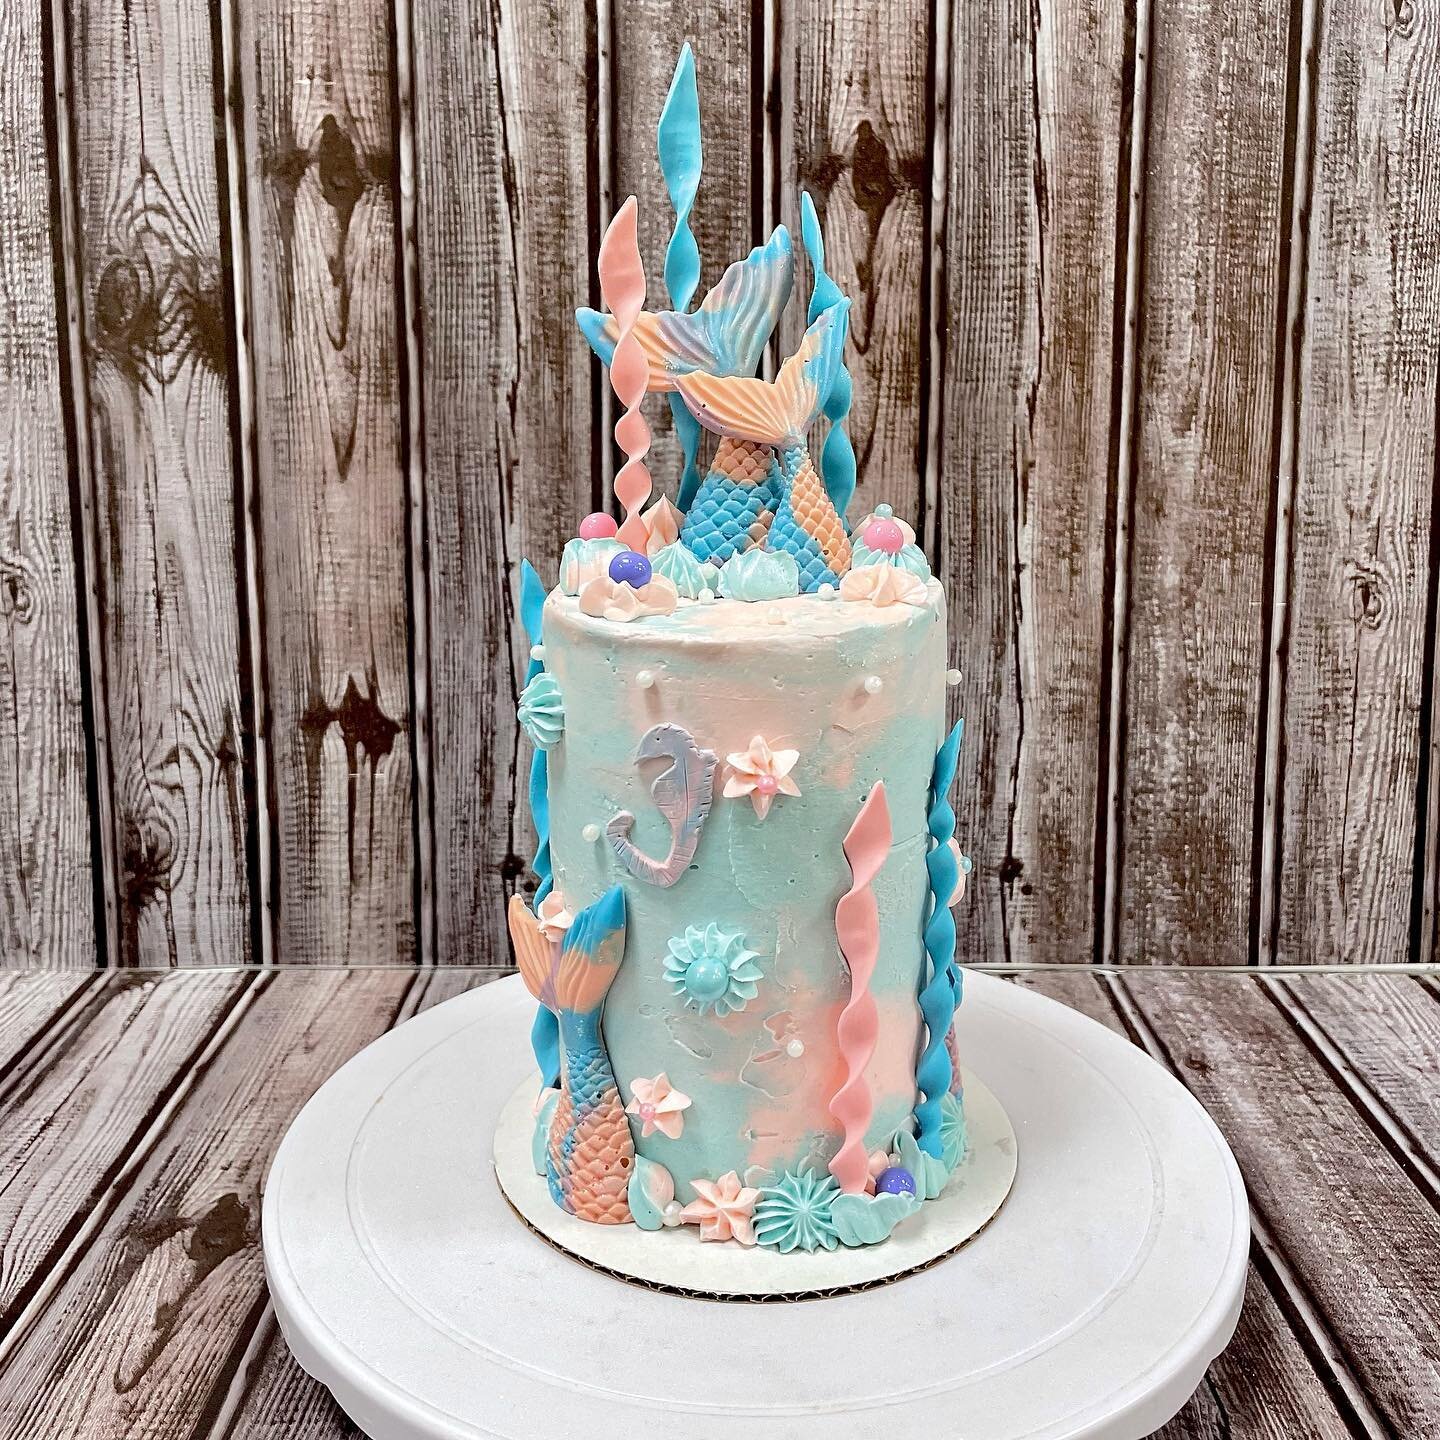 I&rsquo;m obsessed with tall cakes!! This beaut is a miniature remake of the sprinkle-filled mermaid cake from a couple weeks ago. How mini? Swipe to see a size comparison! 
&mdash;&gt;

This pretty got lots of love and attention when I posted it, en